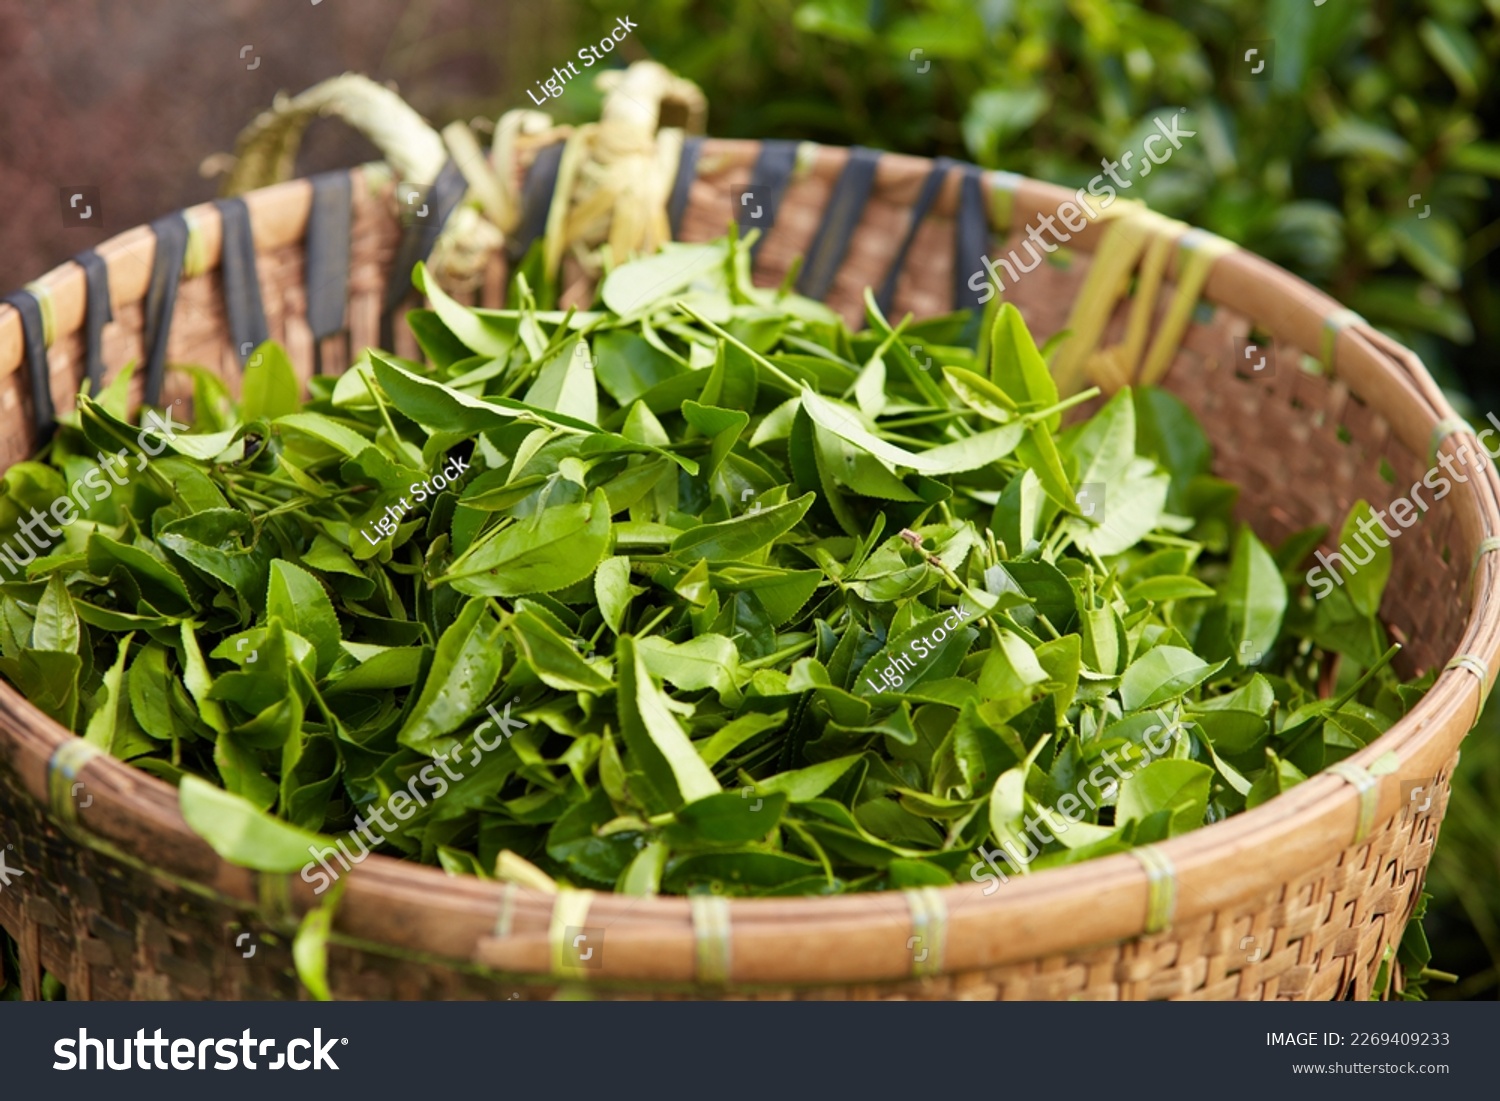 A lot of green tea leaves arranged in a bamboo basket. For product promotions extracted from green tea leaves #2269409233